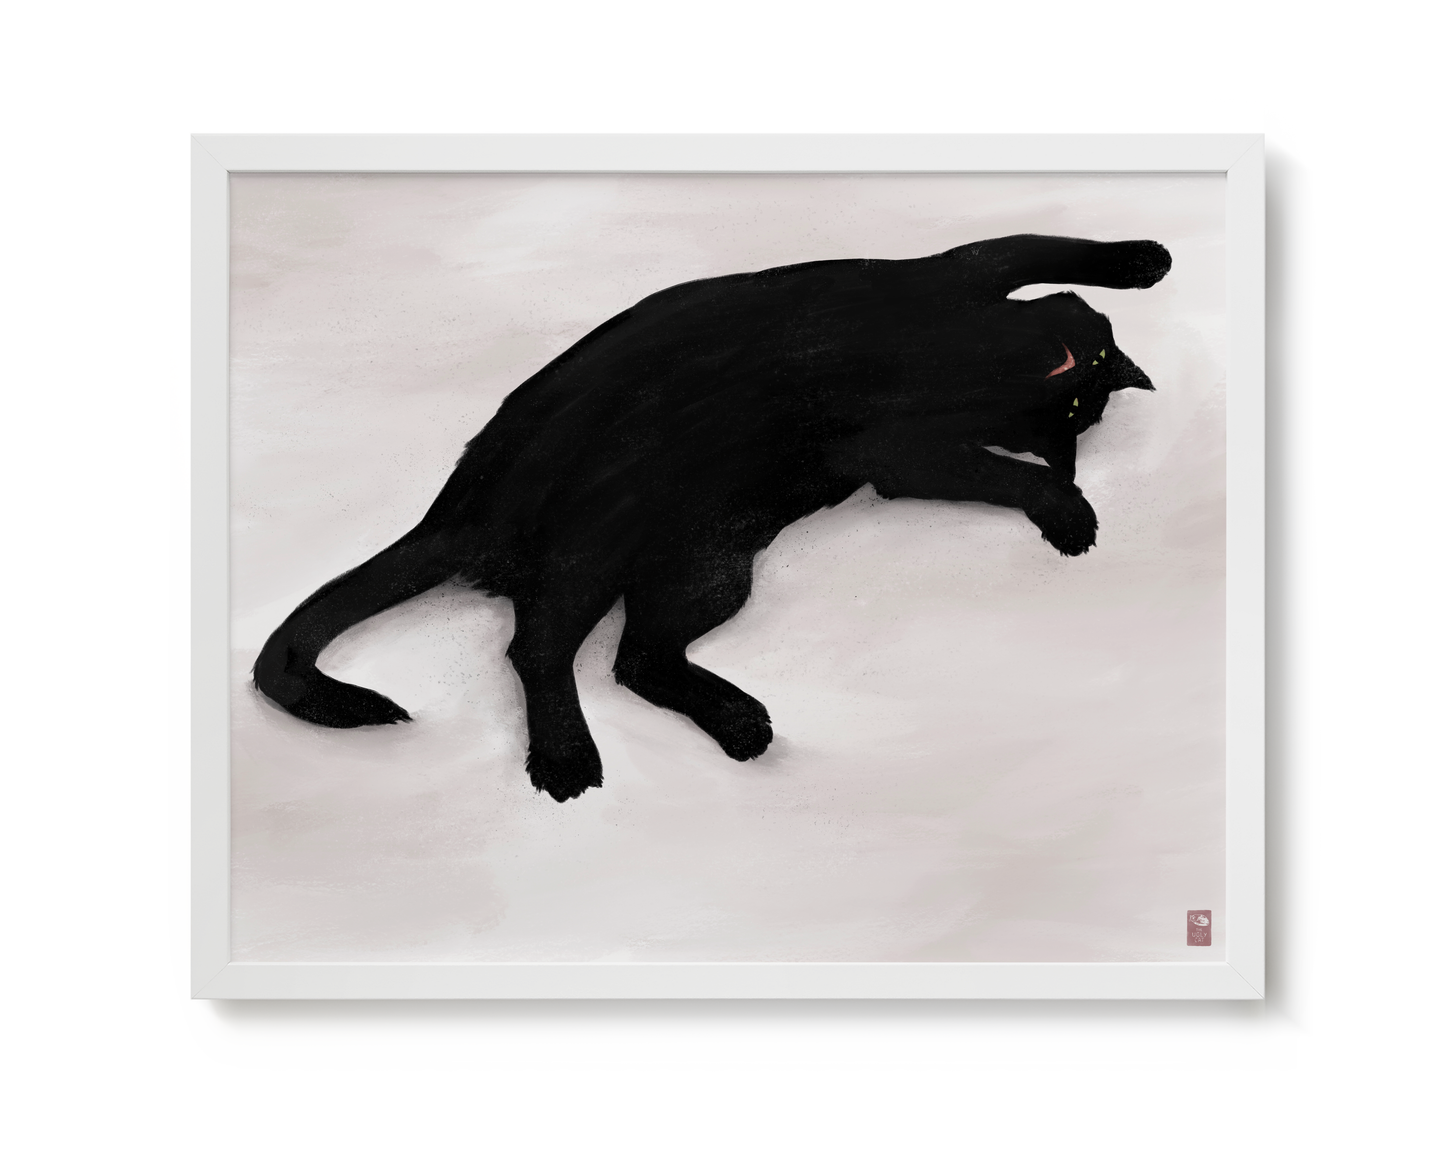 "Sillhouette of Woodhouse" by Catherine Hébert - Cat Silhouette Giclee Art Print - 16"x20" size